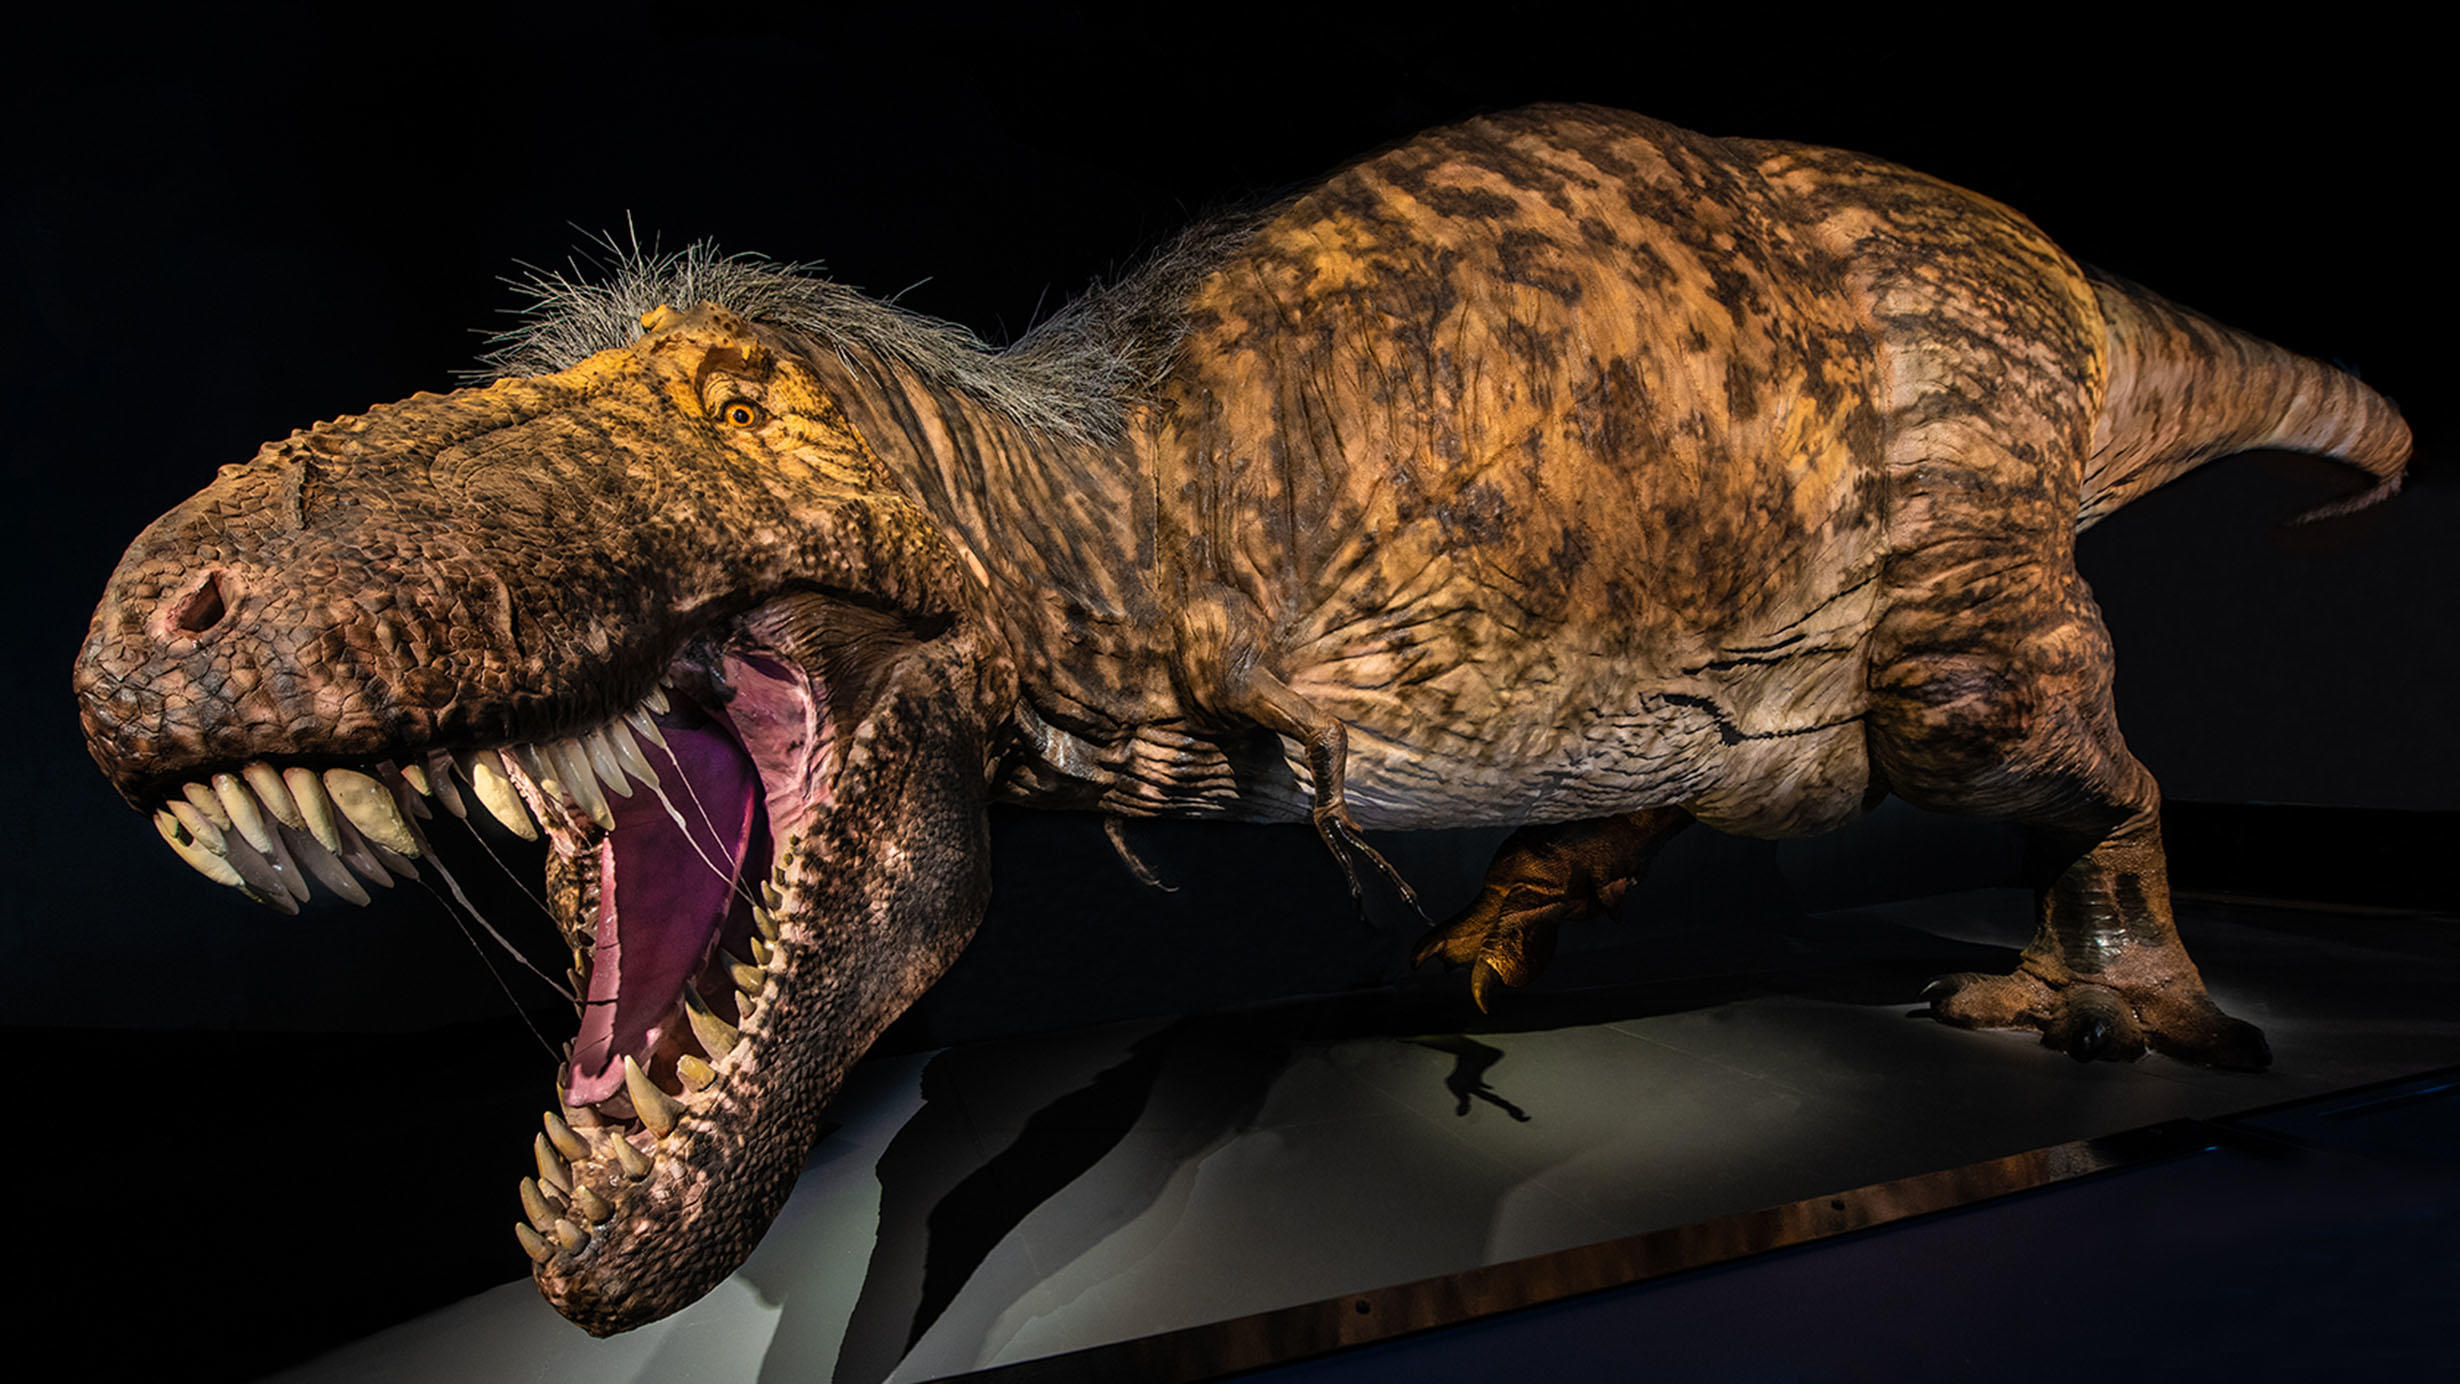 A life-sized model of T. rex with patches of feathers—the most scientifically accurate representation of T. rex to date—was displayed at an American Museum of Natural History expedition from 2019 to 2021. Credit: D. Finnin/© AMNH. Click image to download hi-res version.